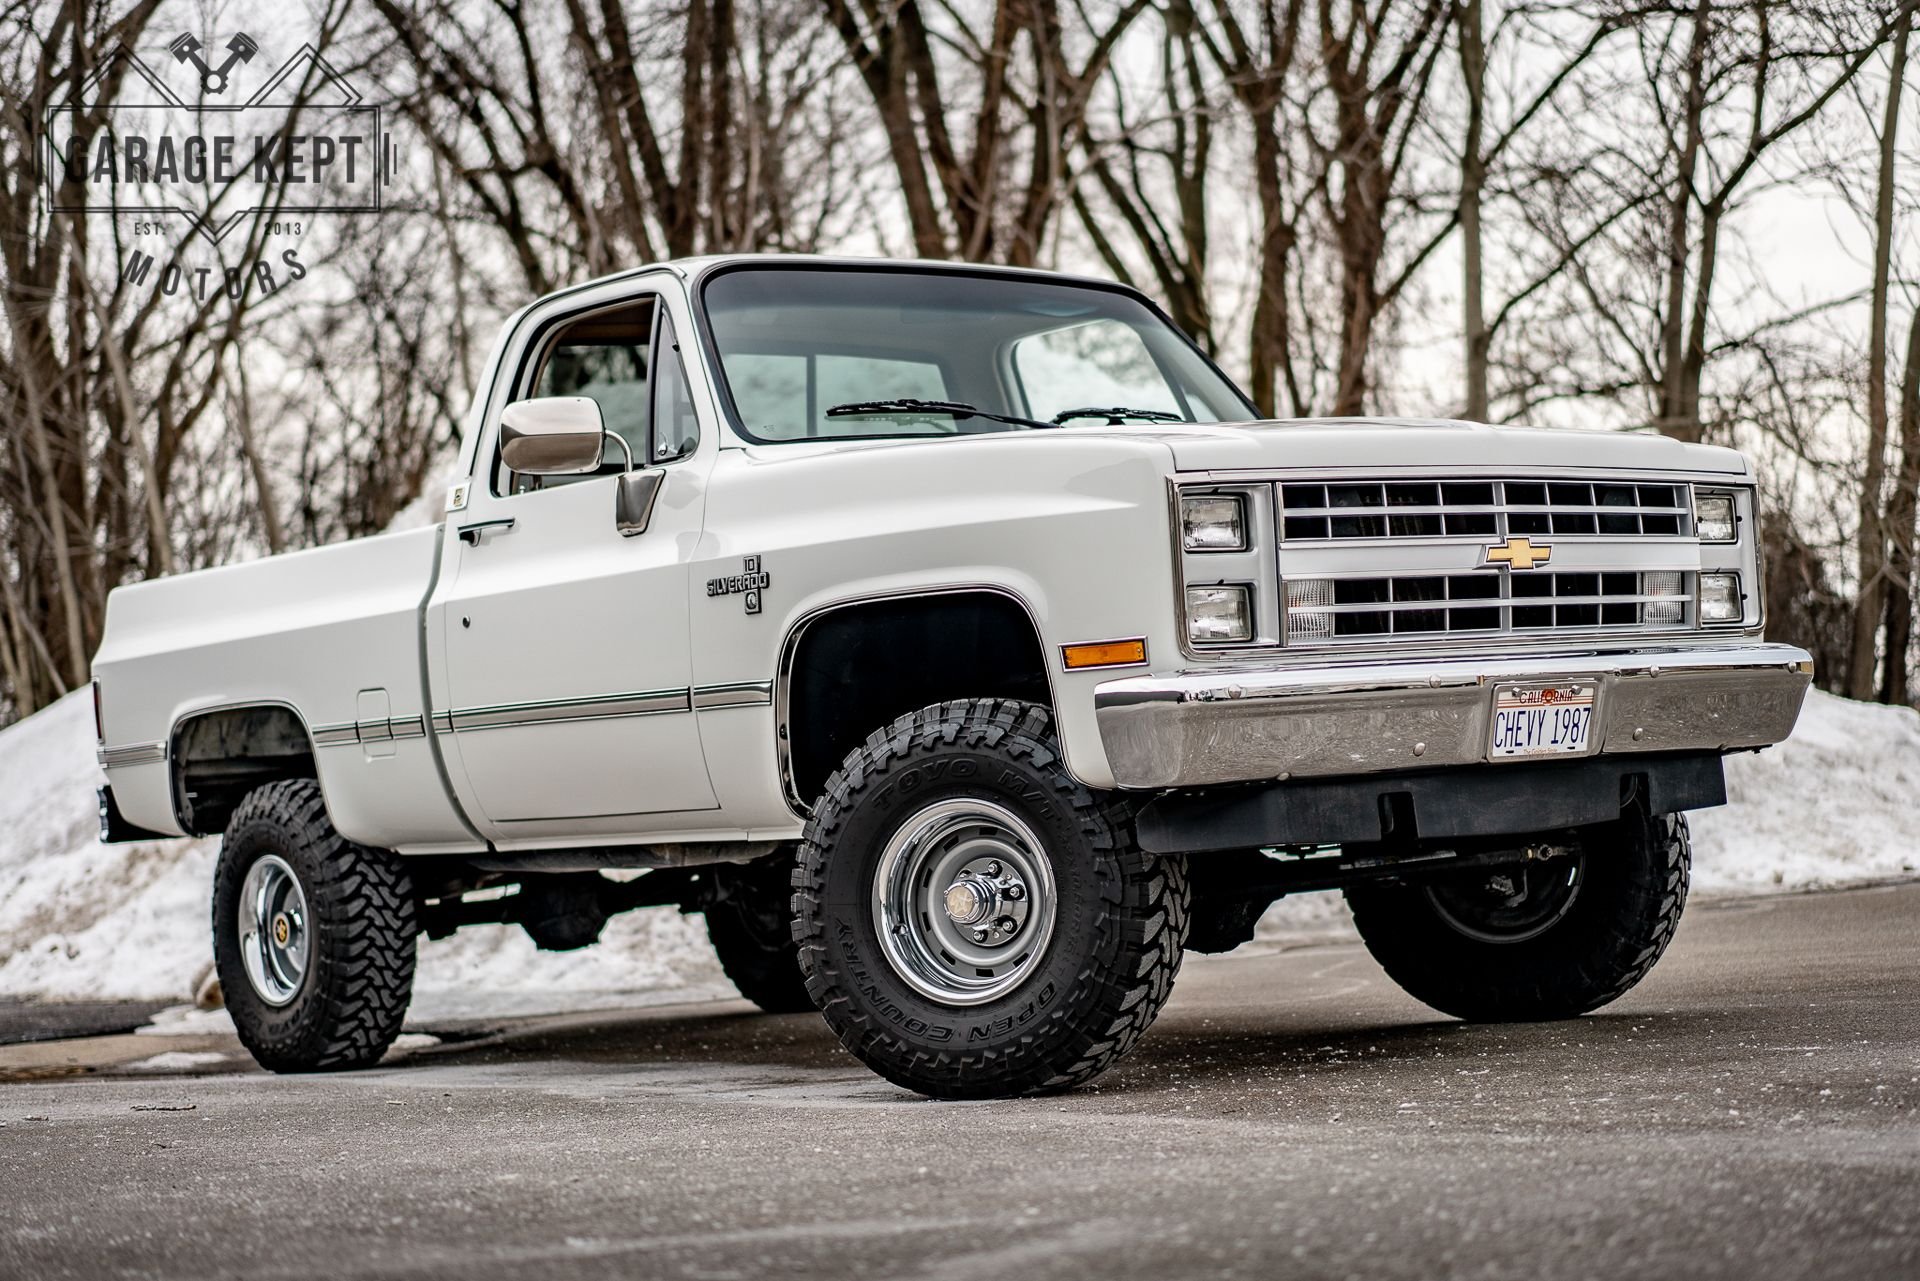 Lifted 1987 Chevy K10 Has Dreams of Winter, but It's Sourced From